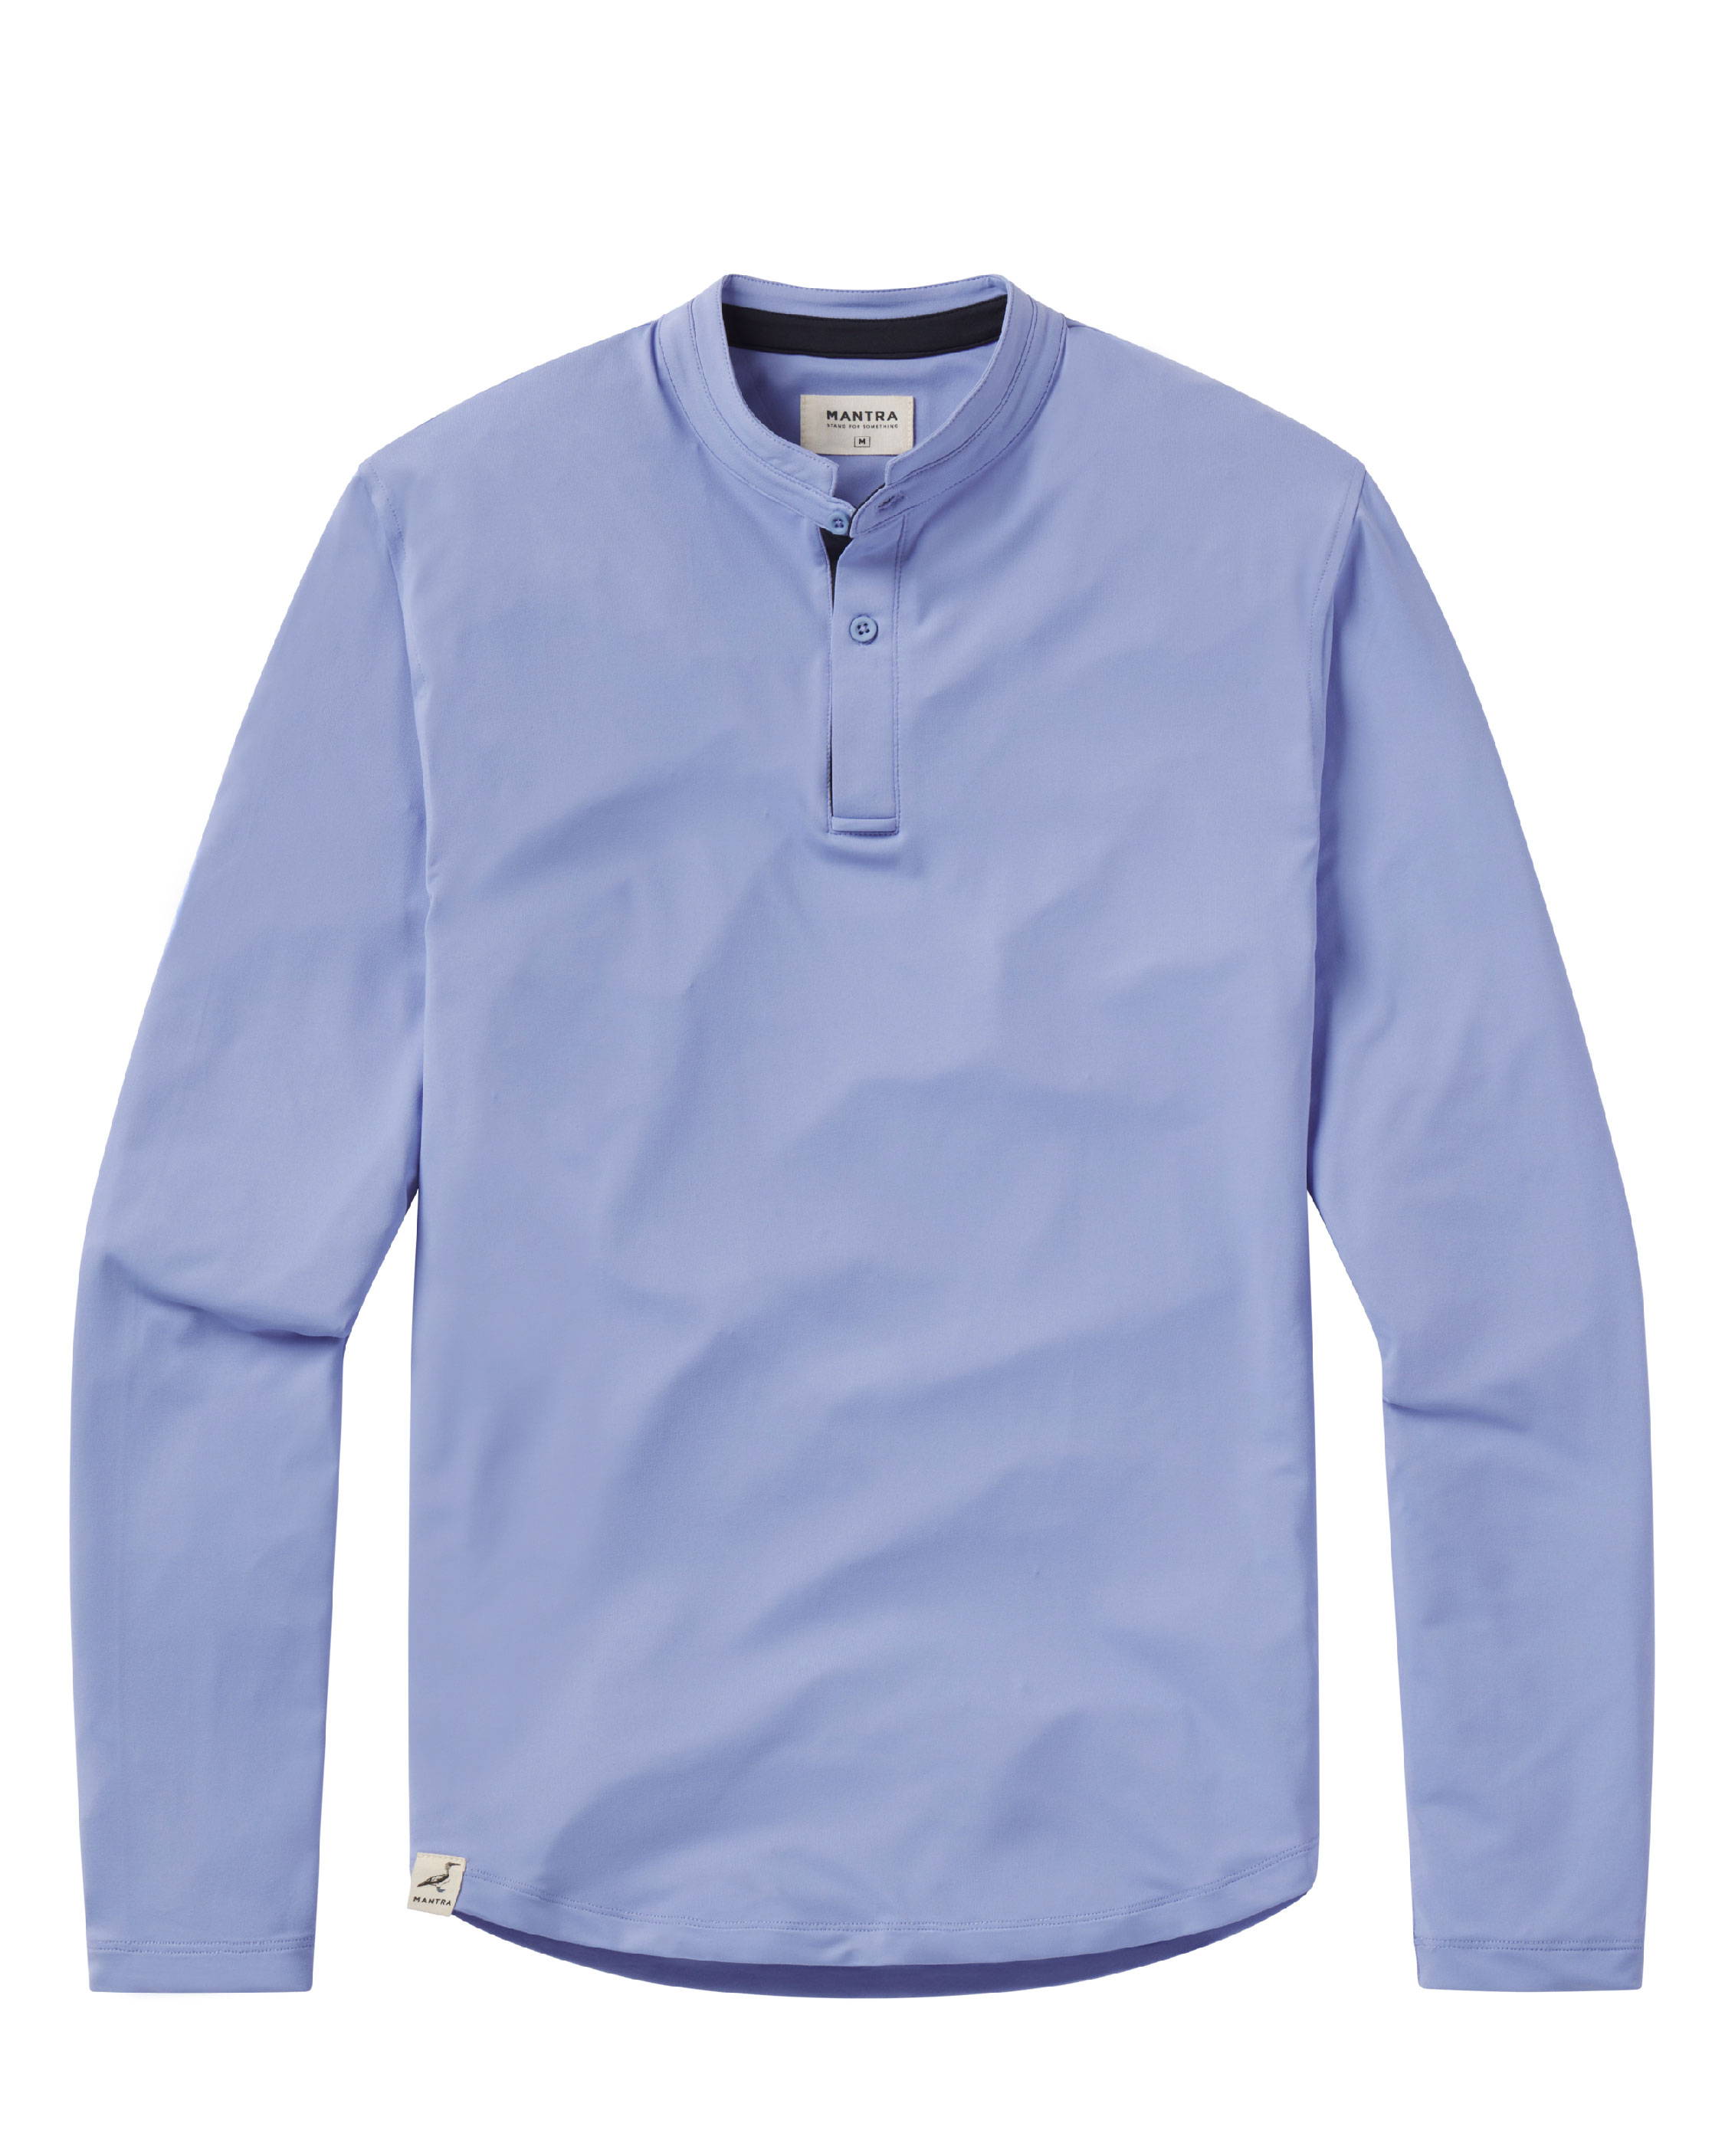 CATALYST POLO L/S - MANTRA COLLAR - LUPINE color selector